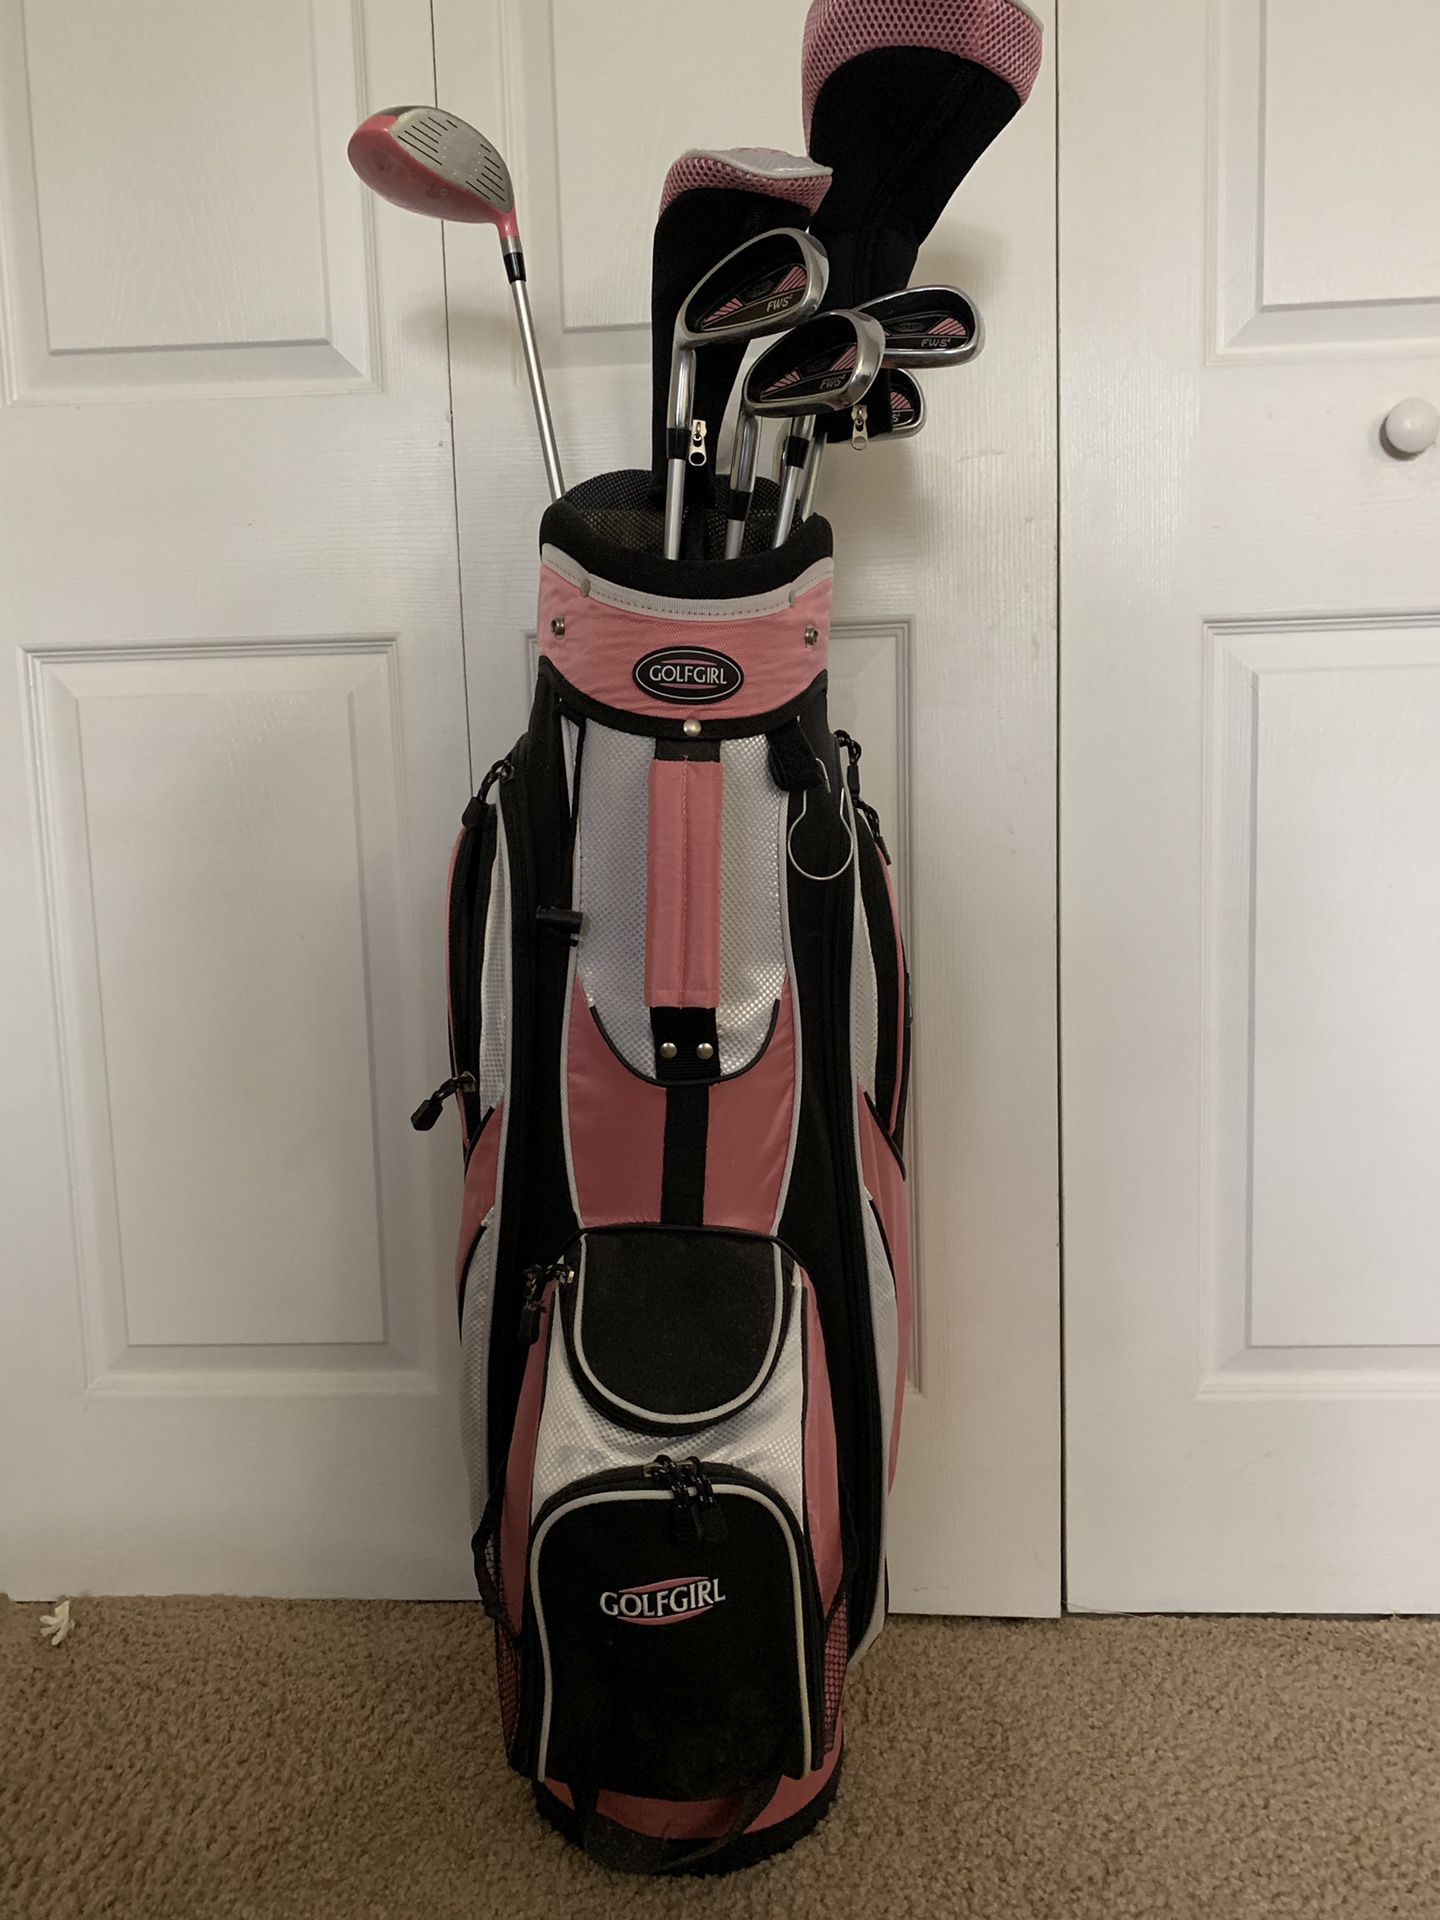 Women’s left handed golf clubs. Slightly used.